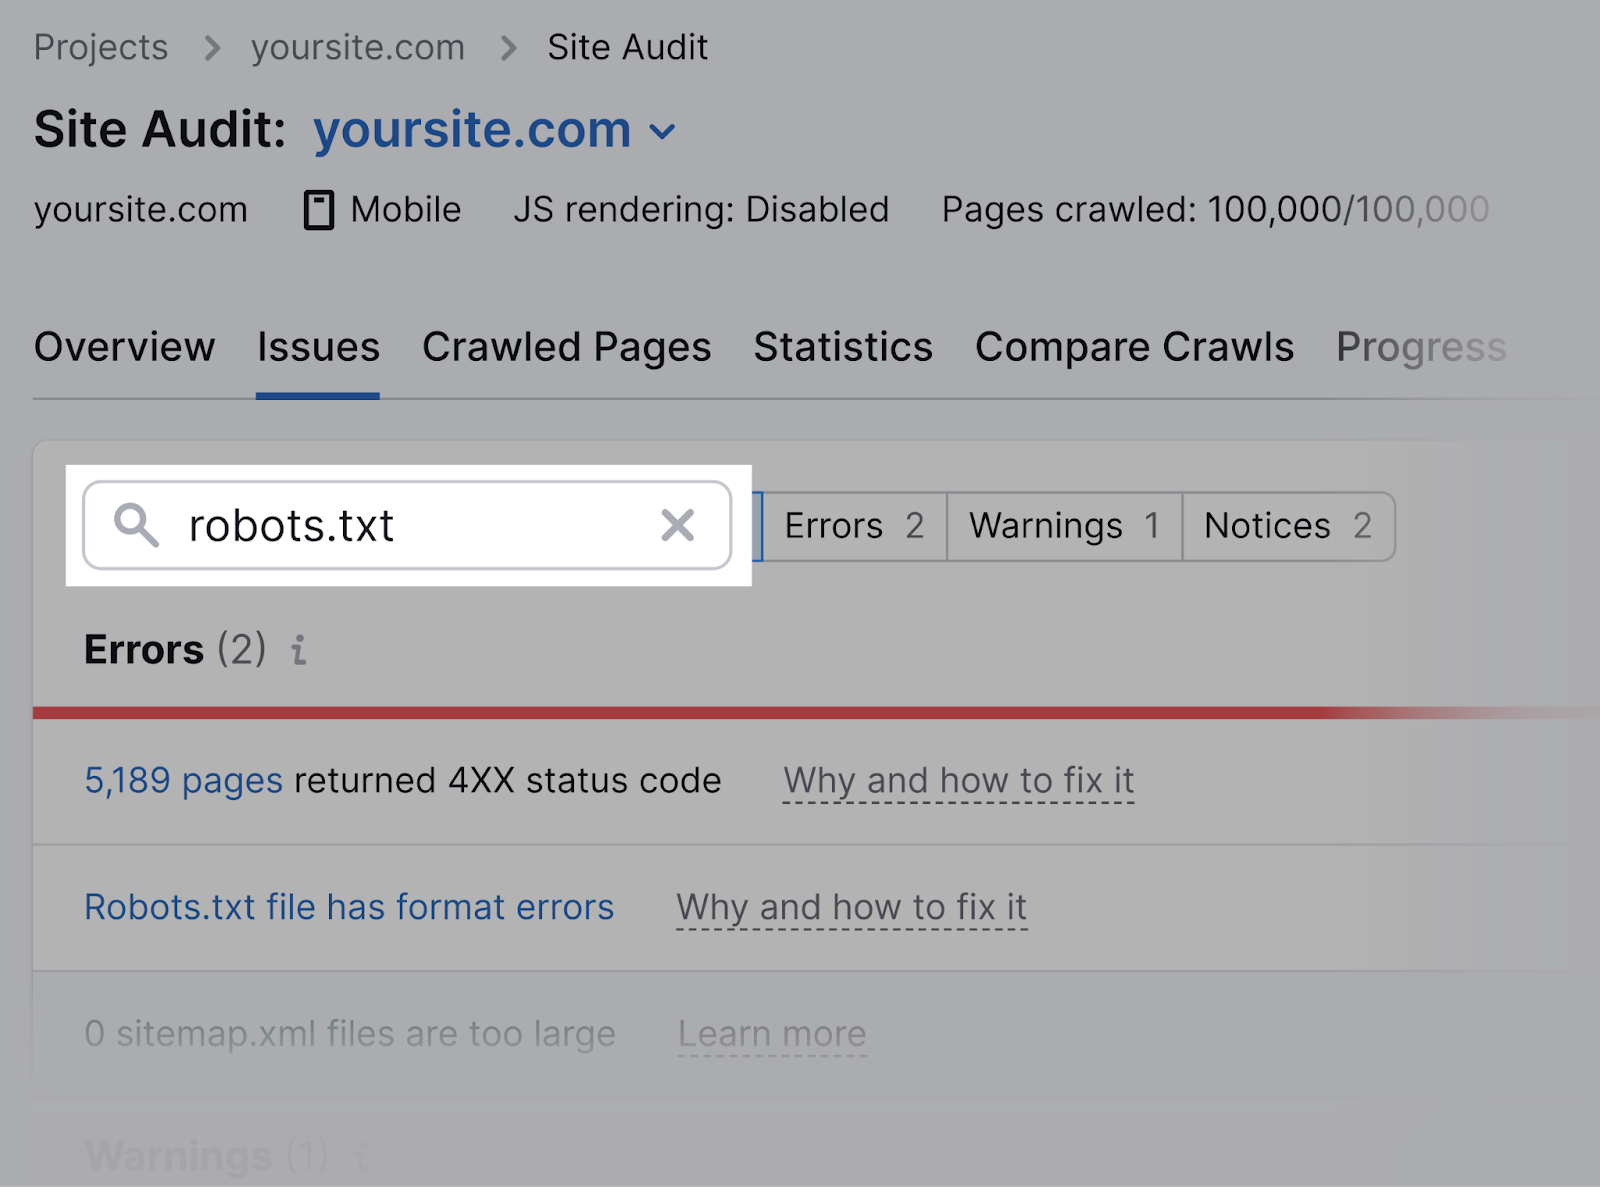 Search for “robots.txt” in Site Audit